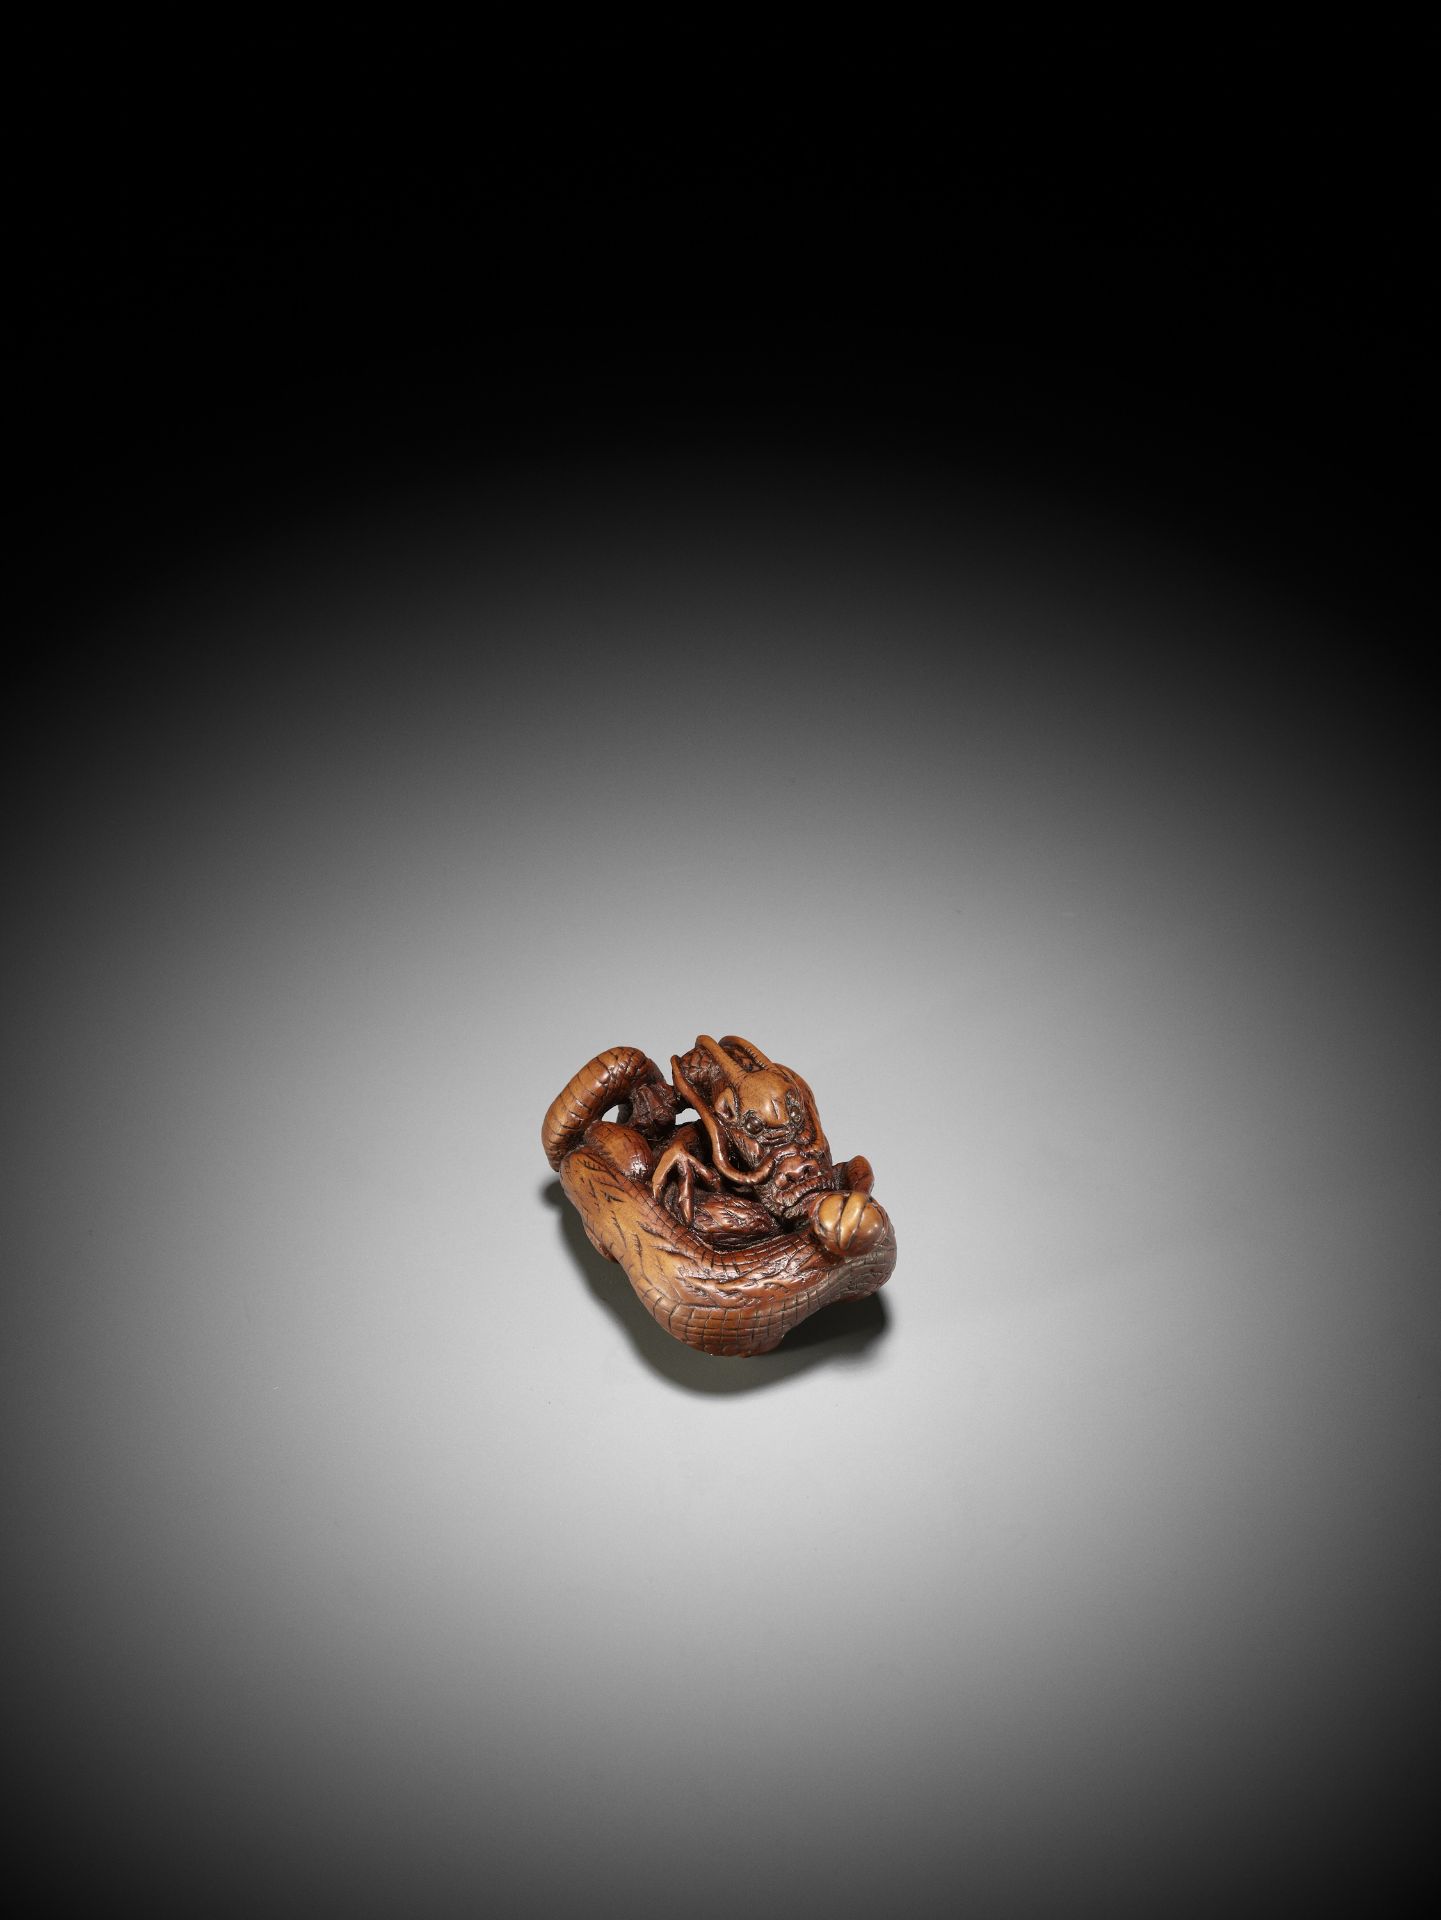 A SUPERB WOOD NETSUKE OF A COILED DRAGON - Image 13 of 14